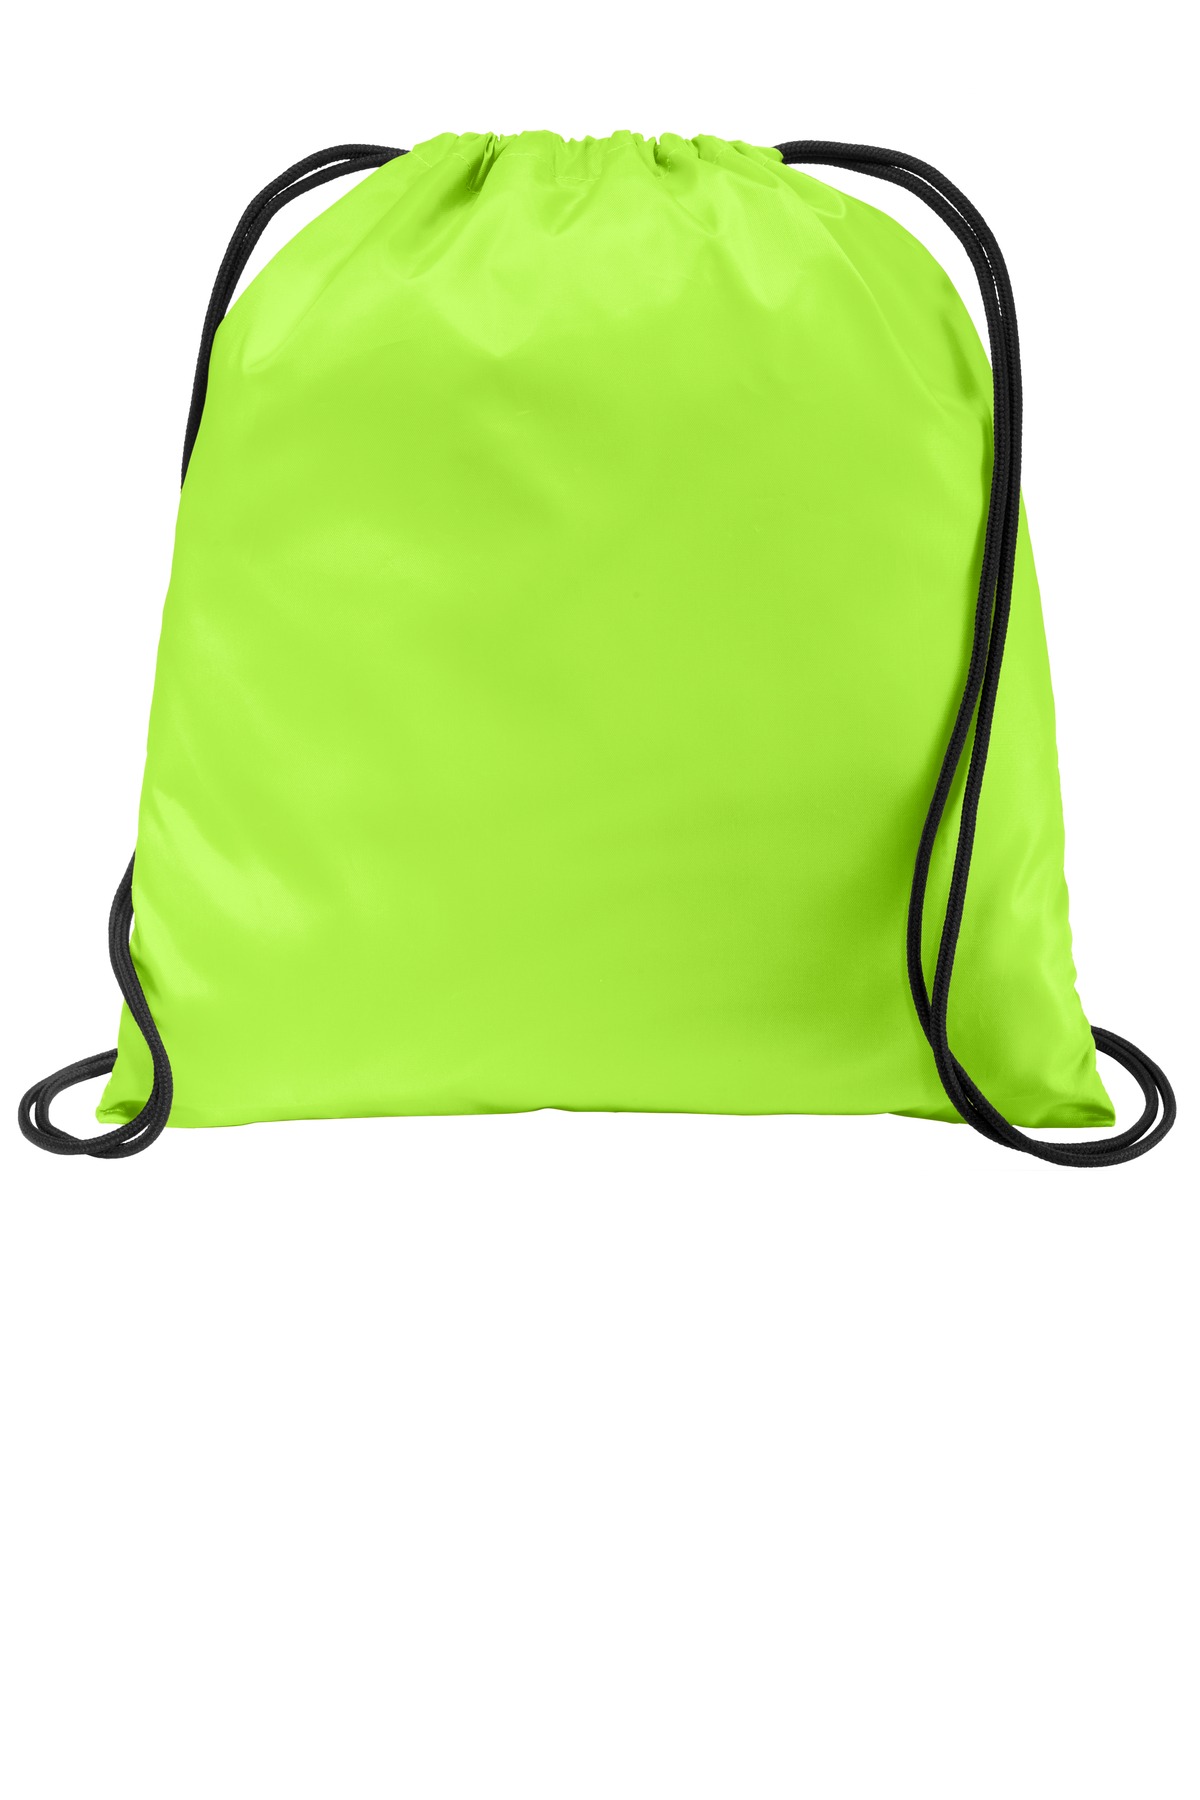 Port Authority Ultra-Core Cinch Pack Bg615 - Lime Shock - One Size - image 2 of 2